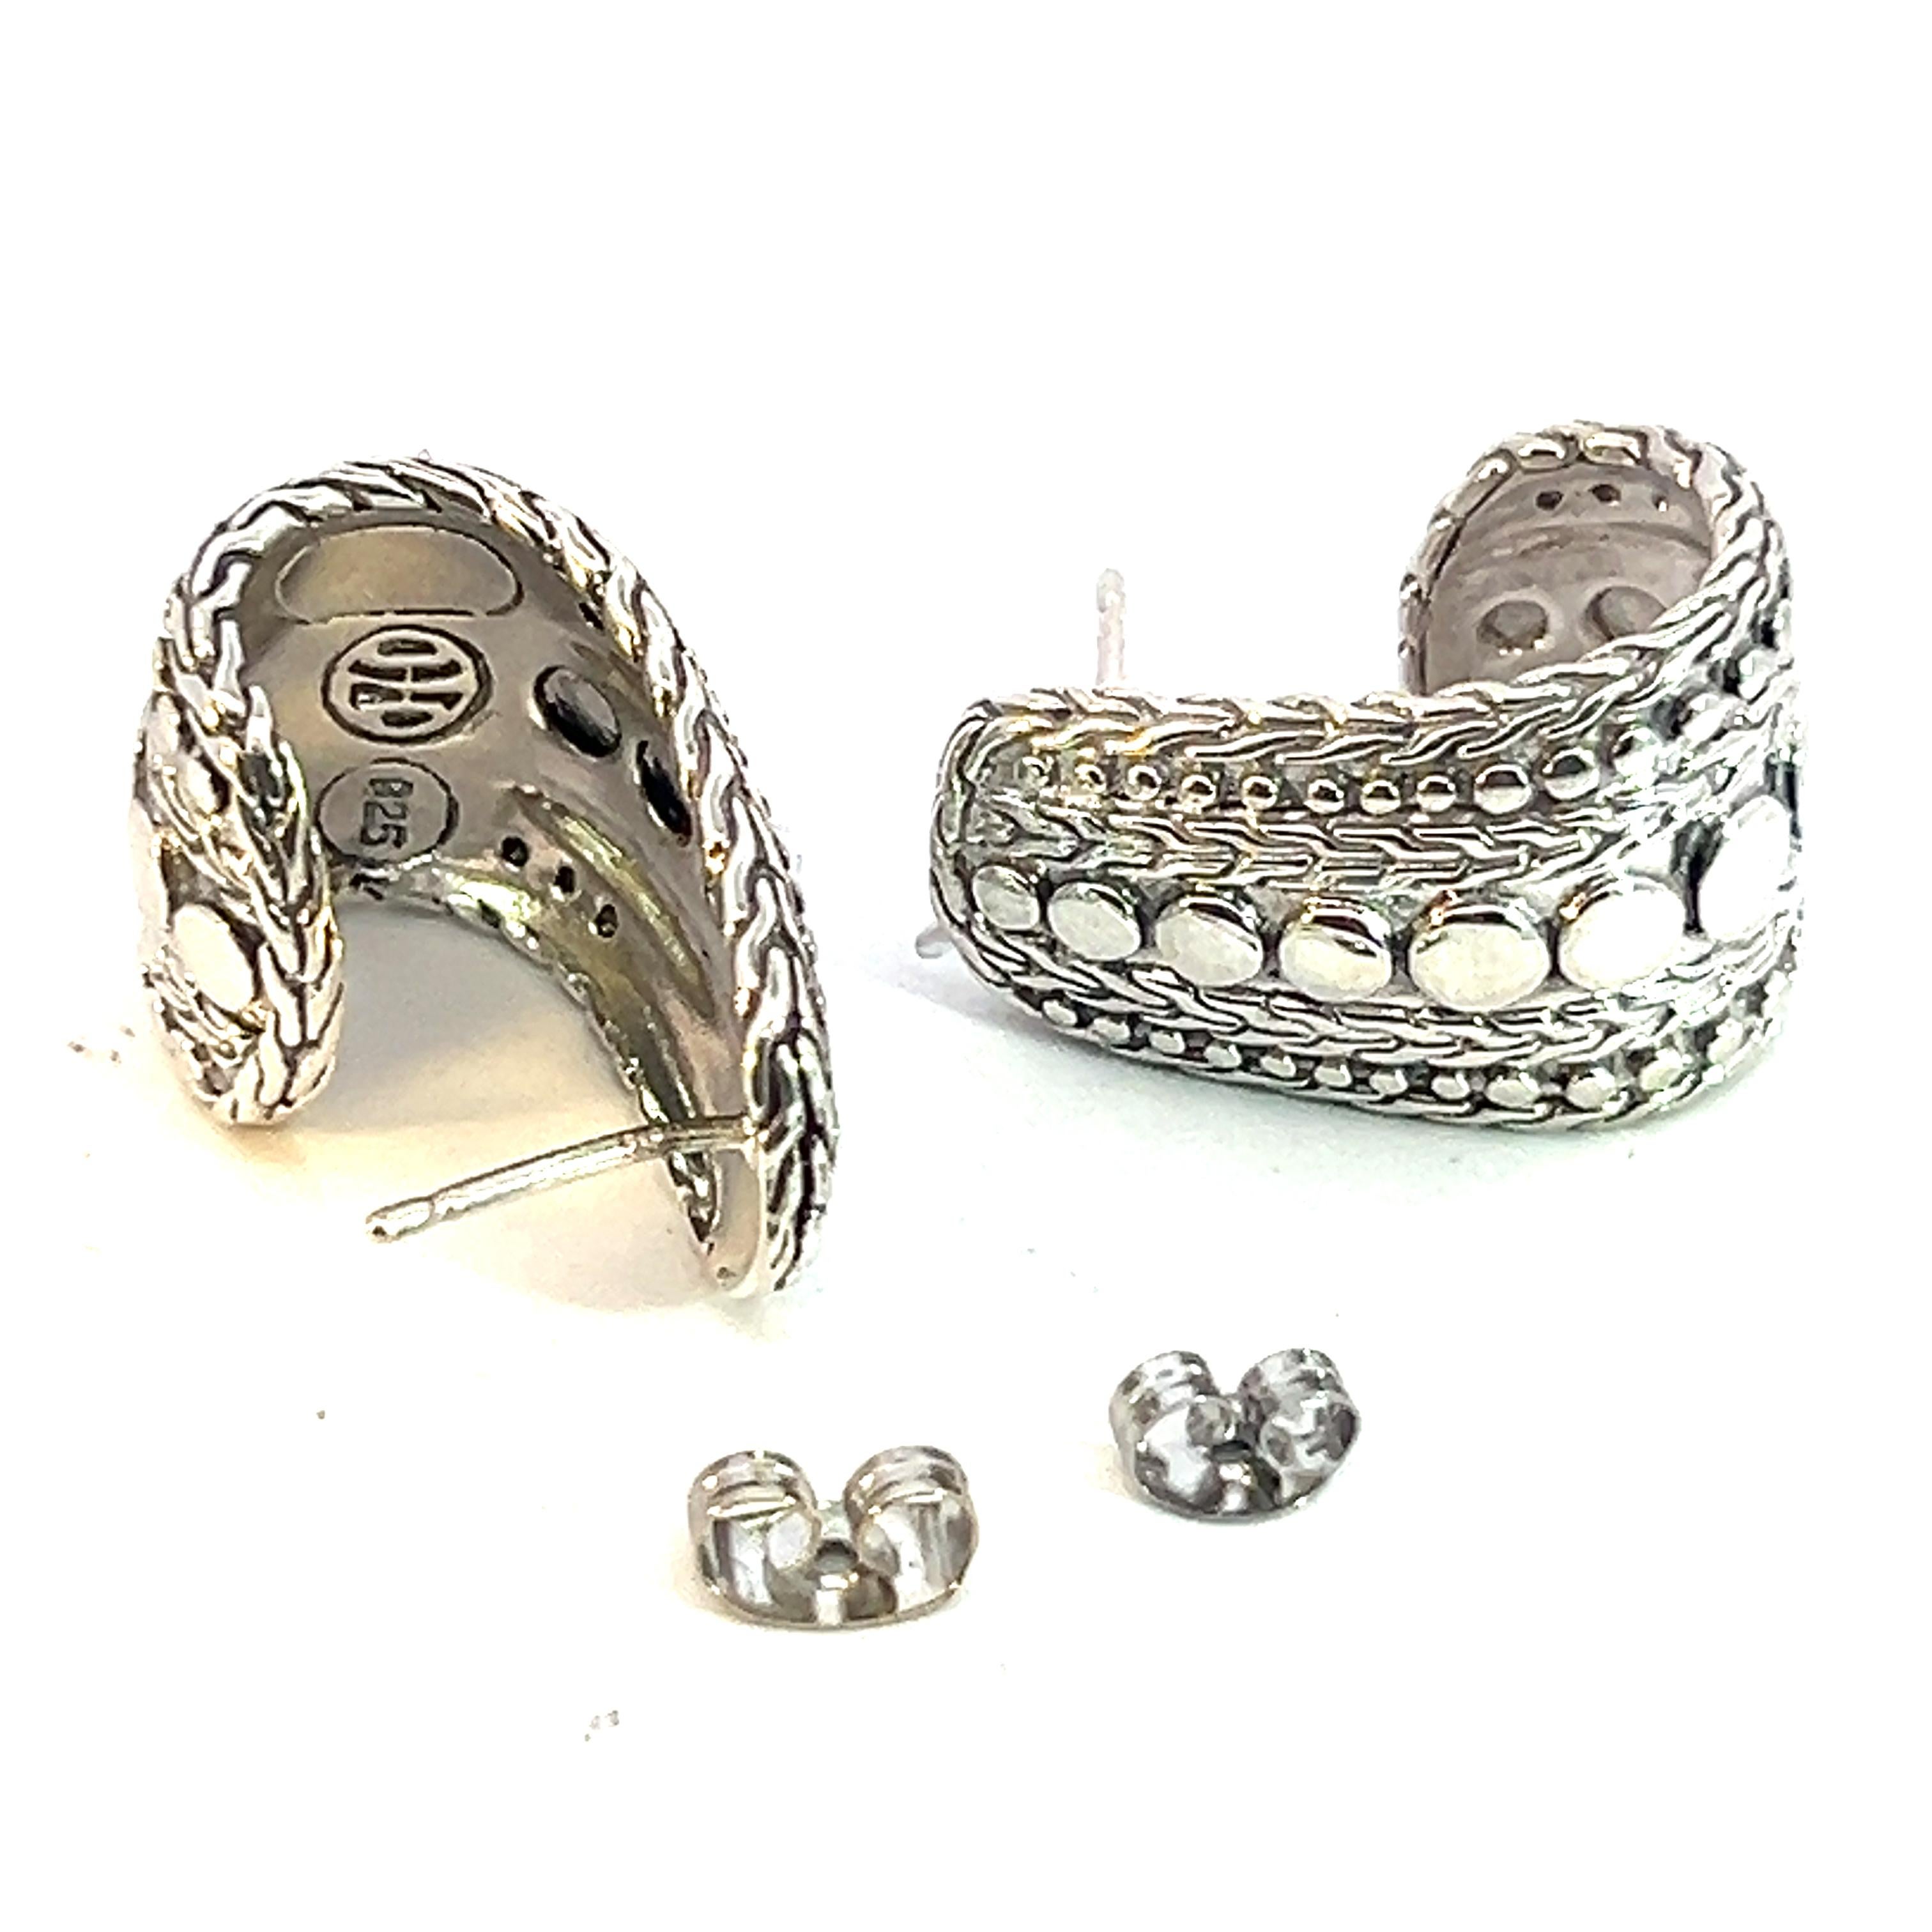 John Hardy Estate Dot Nuansa J Hoop Earrings Sterling Silver JH90

TRUSTED SELLER SINCE 2002

PLEASE SEE OUR HUNDREDS OF POSITIVE FEEDBACKS FROM OUR CLIENTS!!

FREE SHIPPING!!

DETAILS
Style: Dot J Hoop Earrings
Closure: Push Back
Metal: Sterling